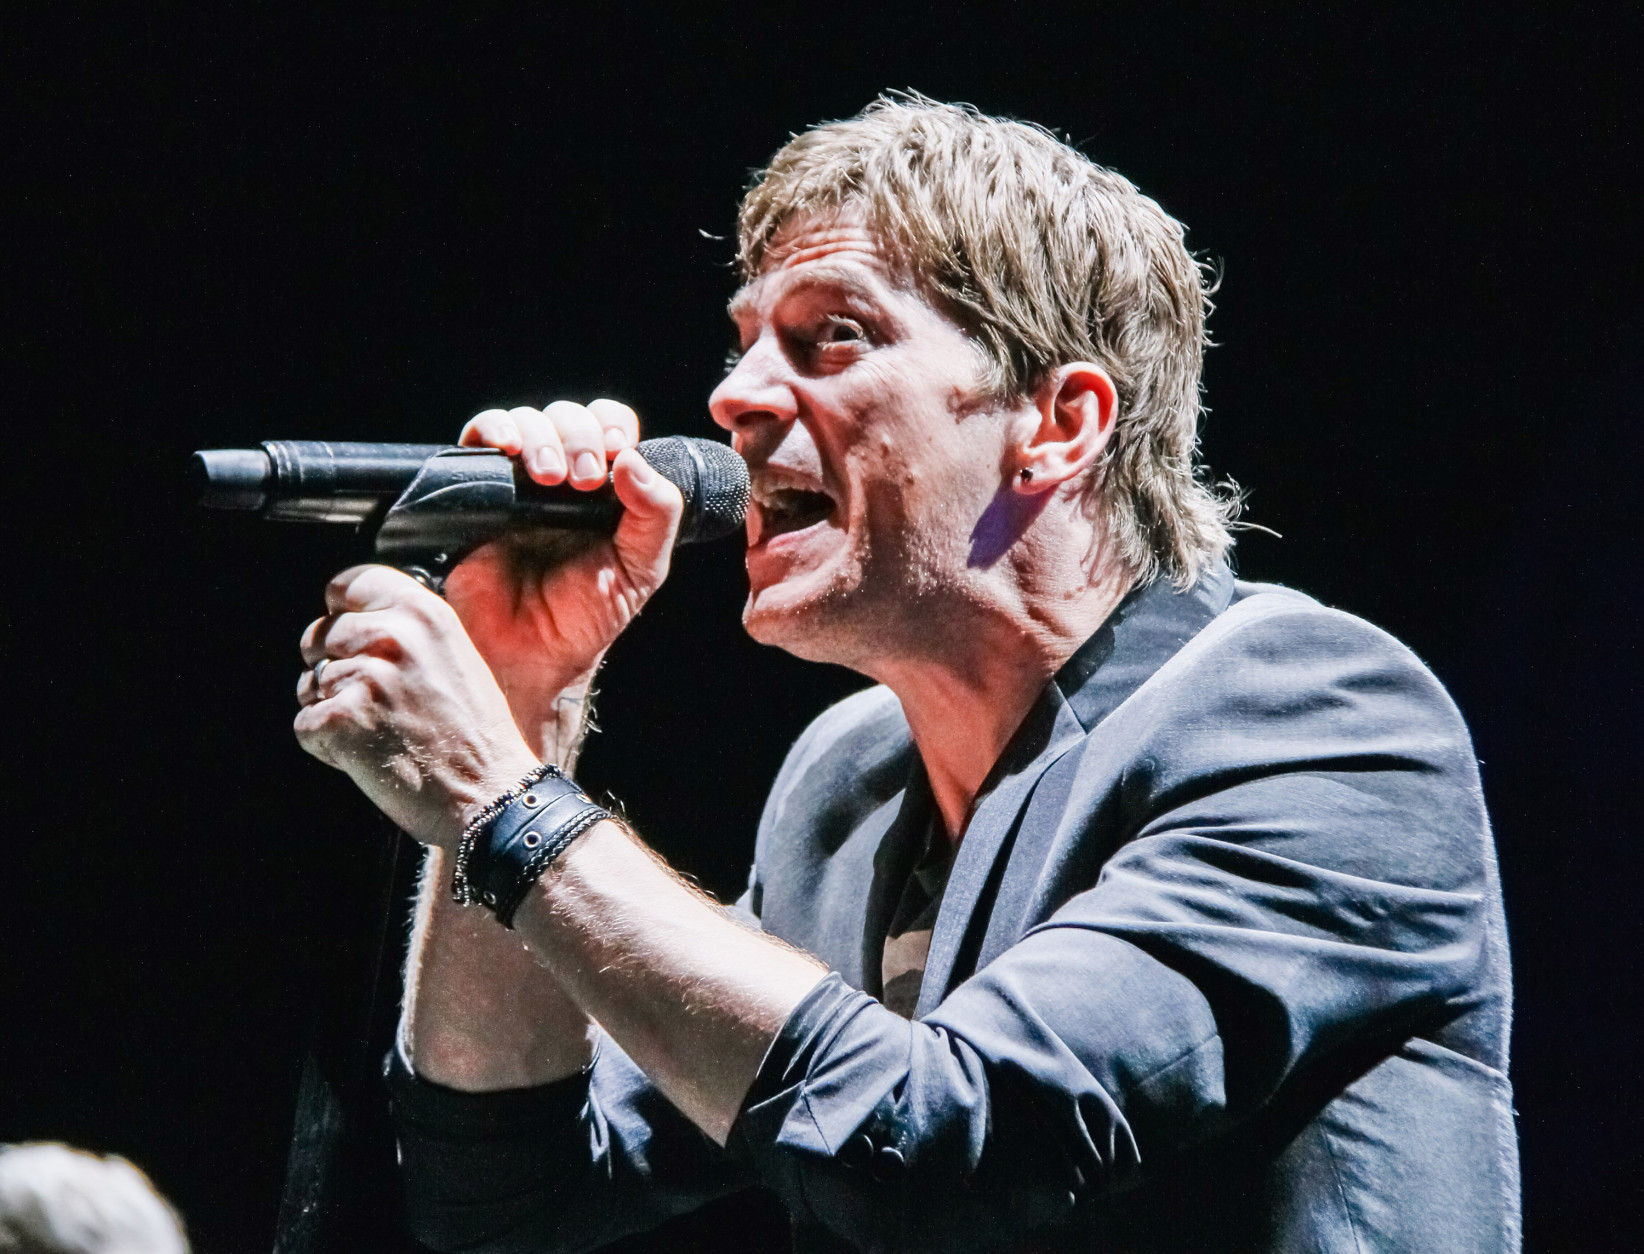 WANTAGH, NY - AUGUST 17:  Rob Thomas of Matchbox Twenty performs at Nikon at Jones Beach Theater on August 17, 2013 in Wantagh, New York.  (Photo by Janette Pellegrini/Getty Images)